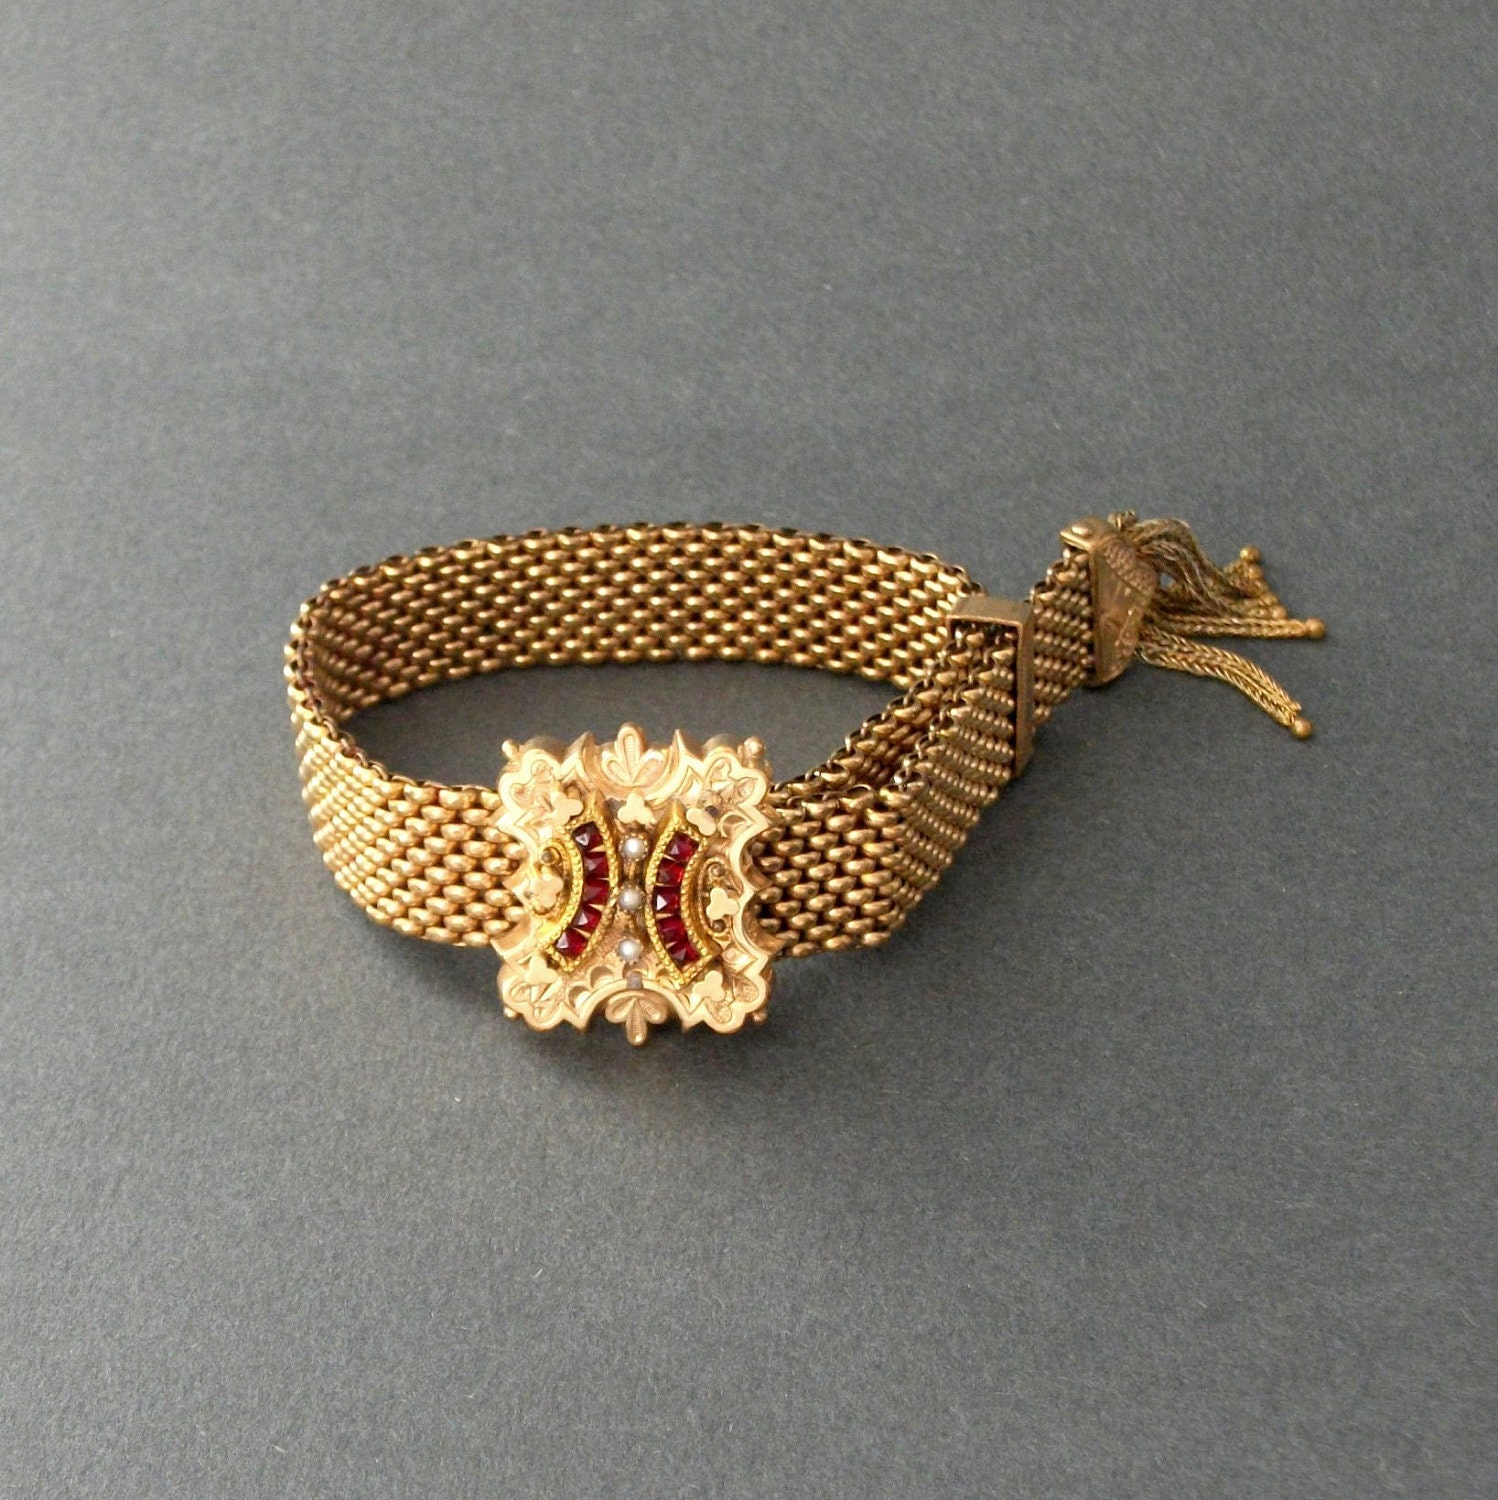 Antique Victorian Jewelry : Mesh Bracelet . Garnets and Pearls